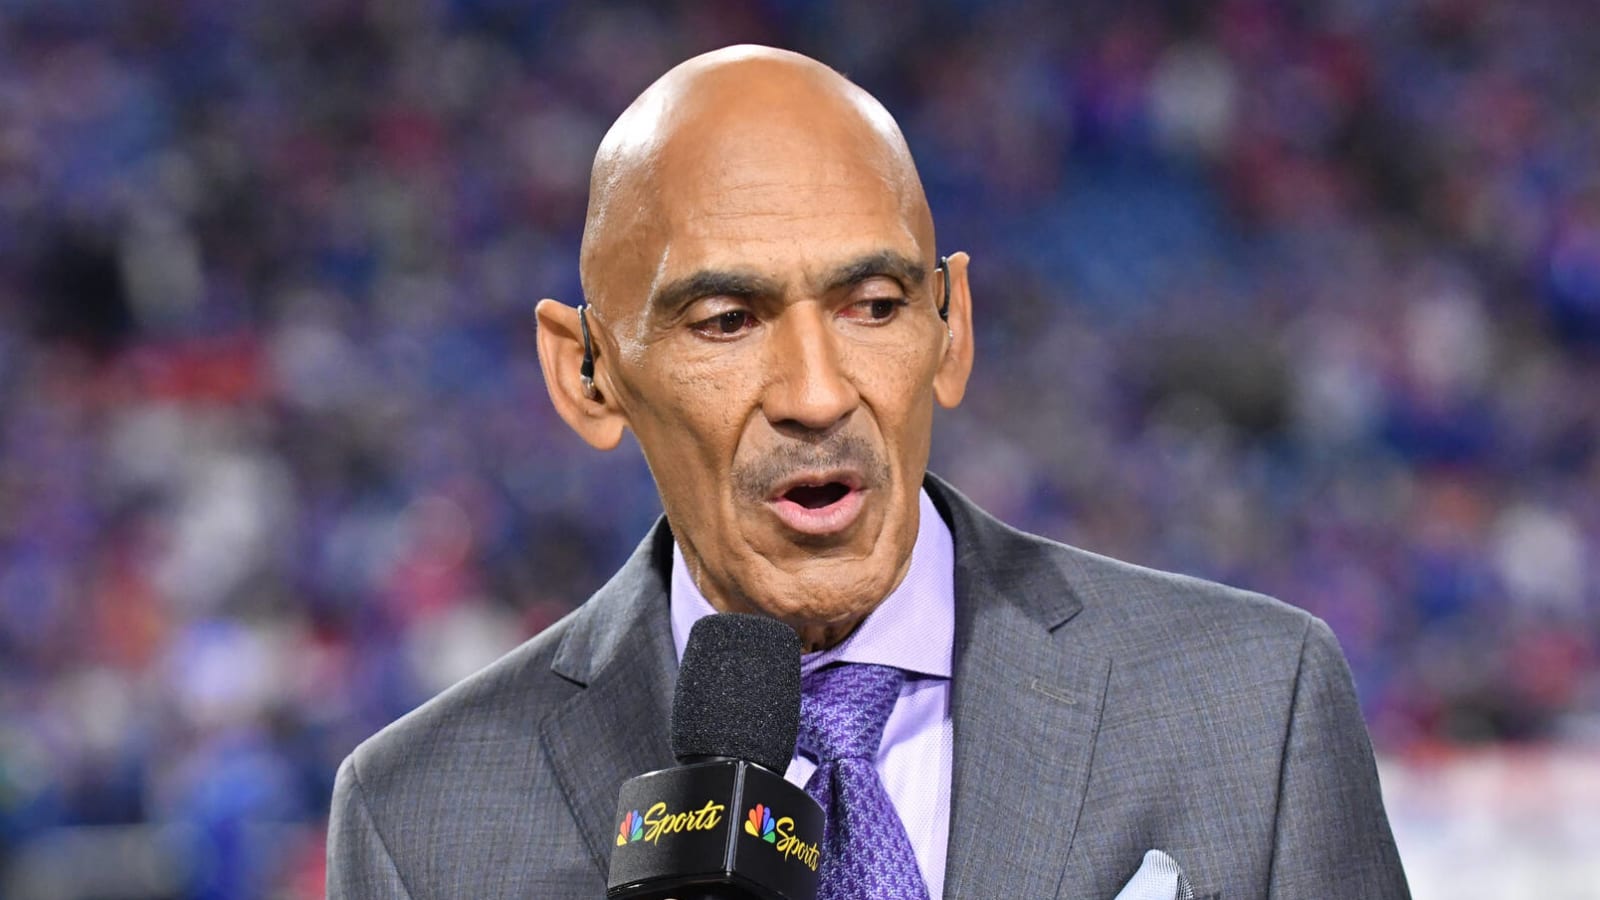 Tony Dungy draws backlash for Taylor Swift comments